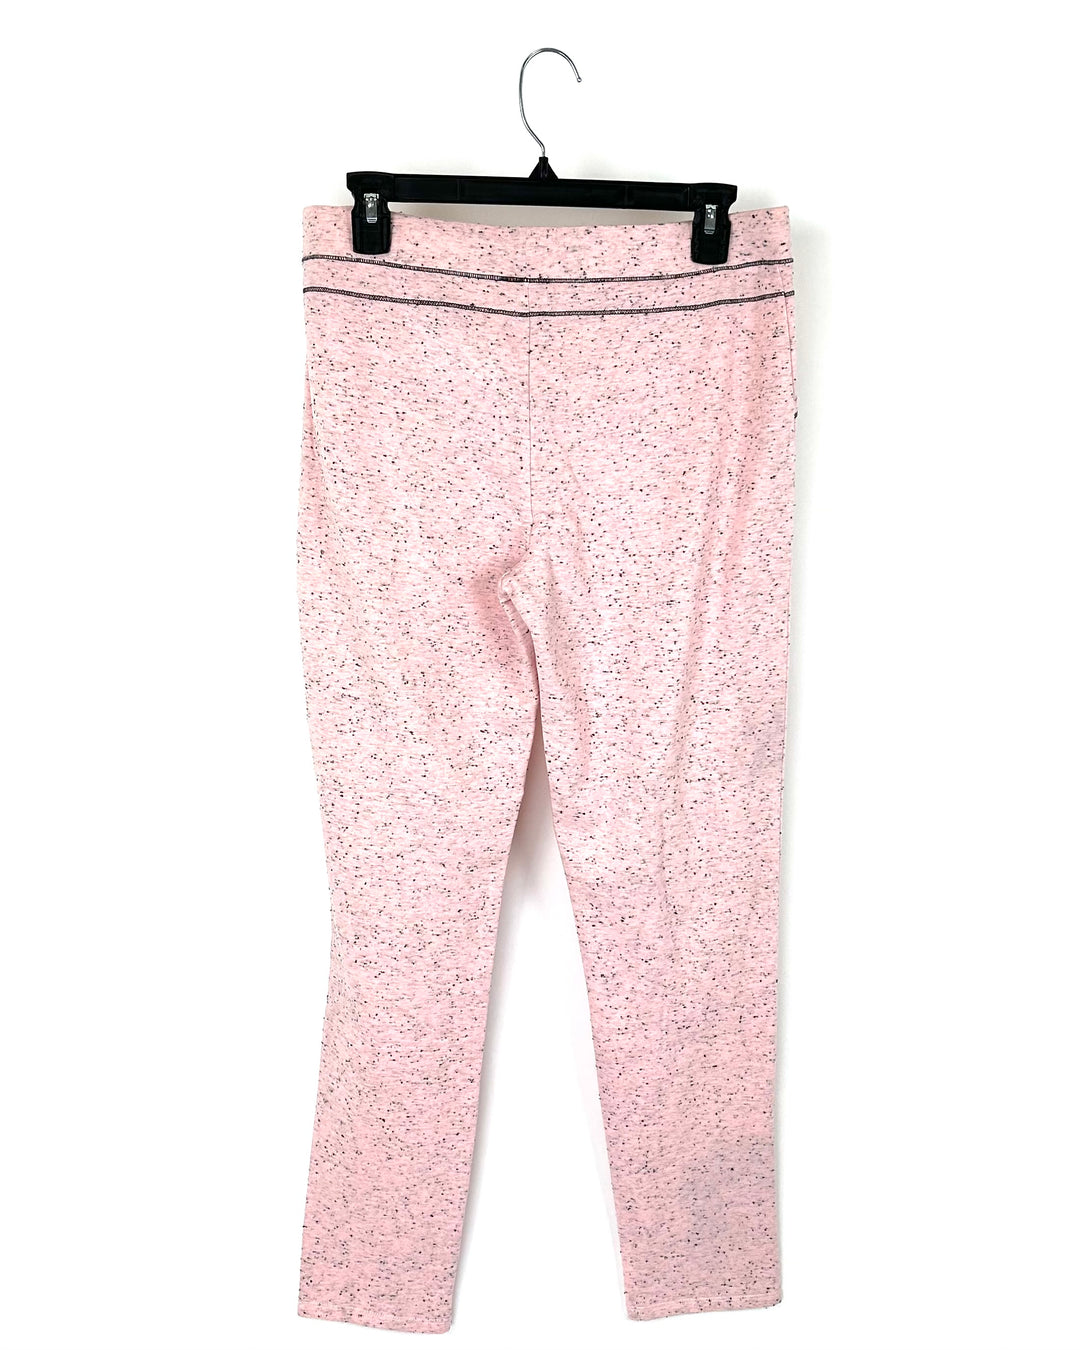 Pink and Black Joggers - Size 8/10